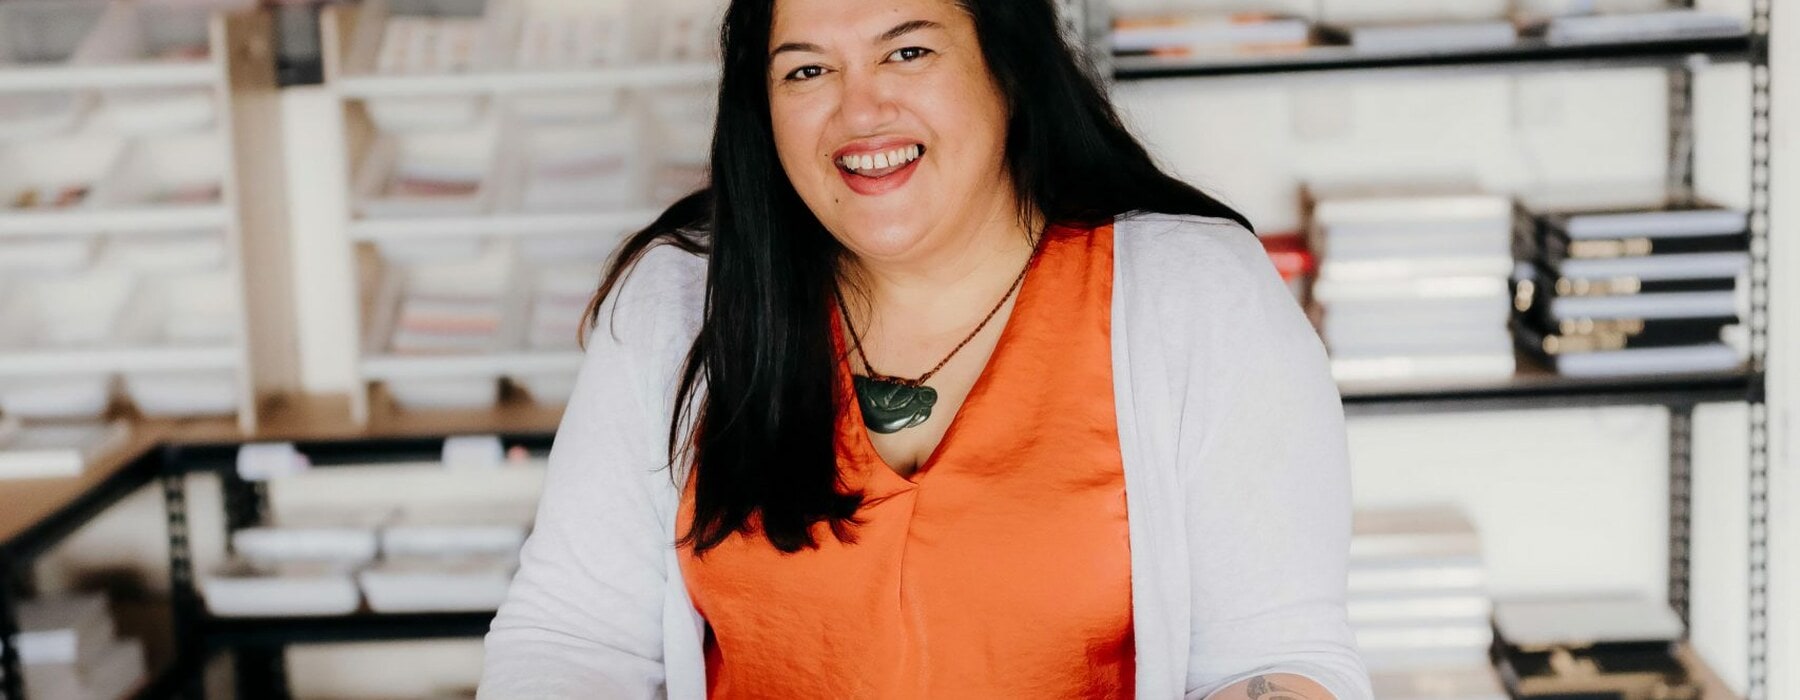 Geneva Harrison holding a Tuhi Stationery planner and wearing an orange top and greenstone necklace